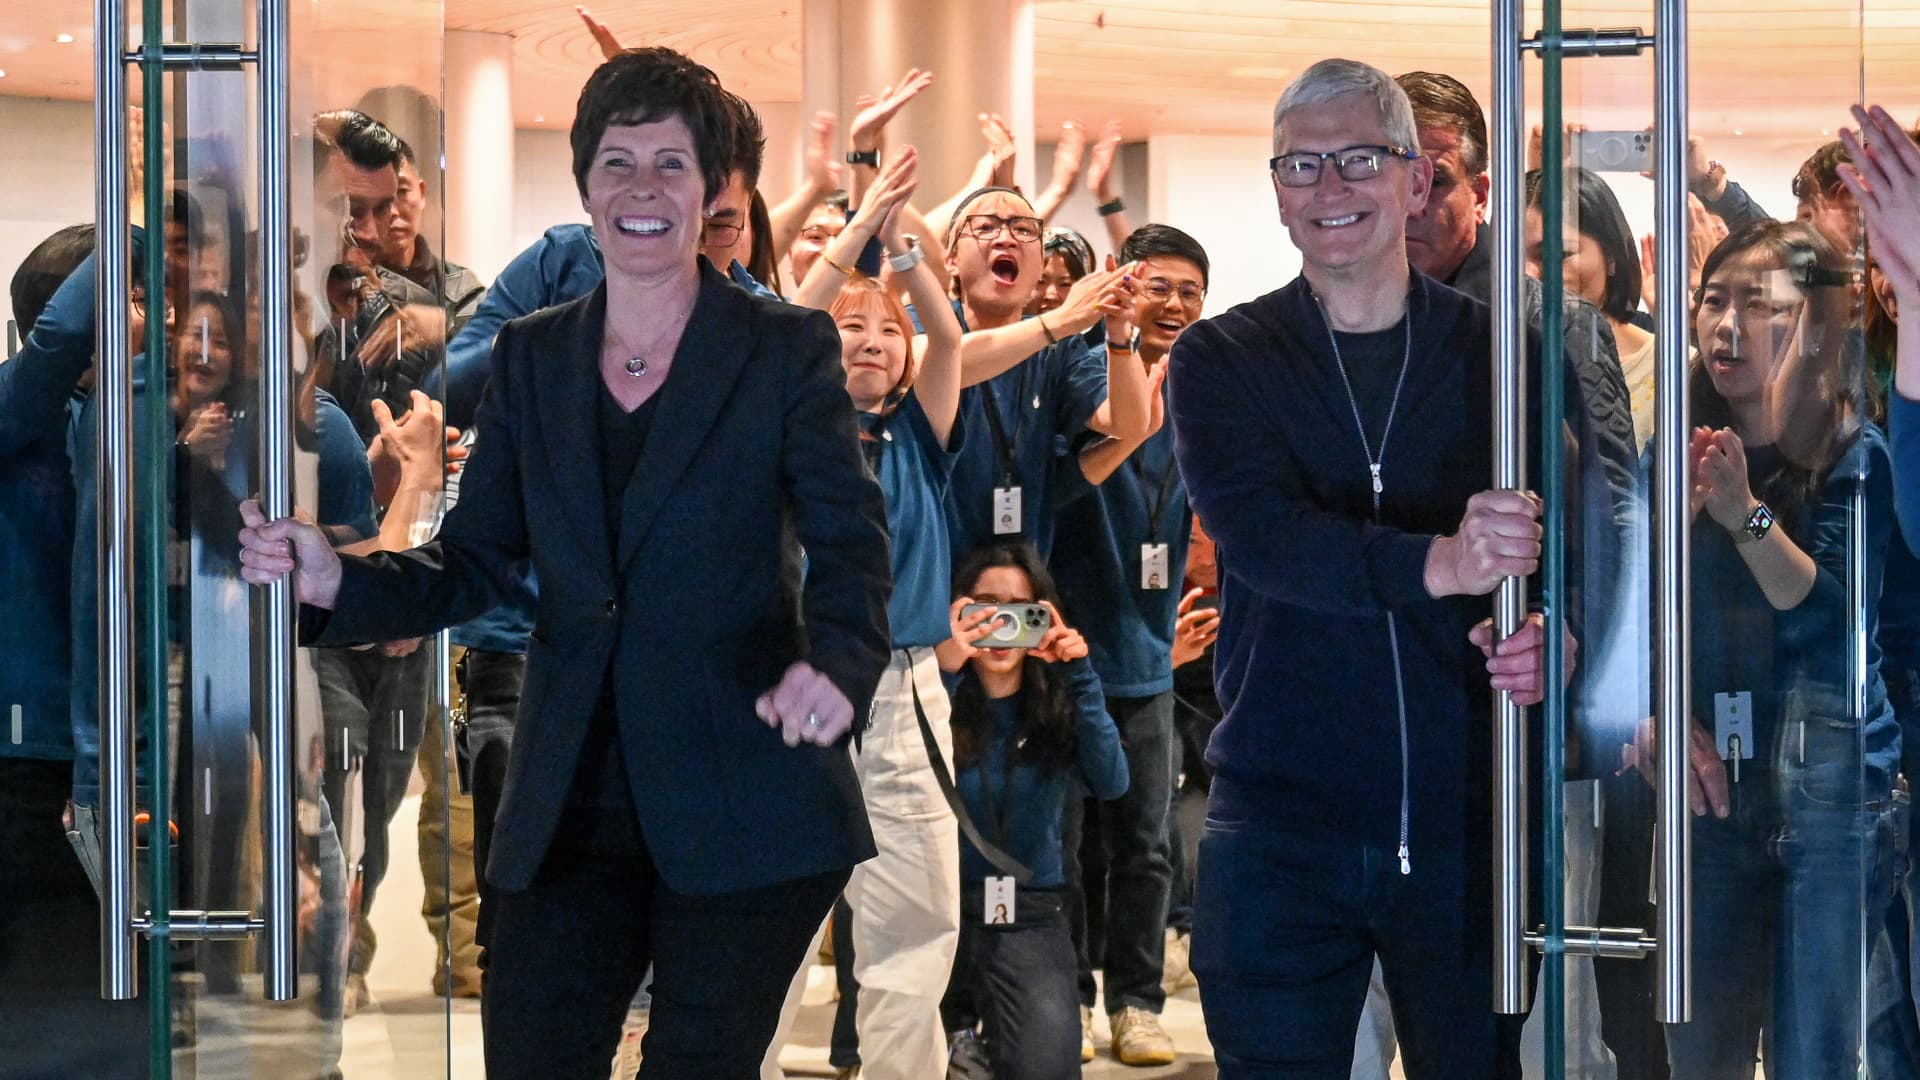 Apple's Chief Executive Officer Tim Cook (R) and Senior Vice President of Retail Deirdre O'Brien open the doors during the opening of Shanghai's new Apple retail store in Shanghai on March 21, 2024. Chinese Apple superfans jostled to enter the smartphone maker's newest store as it opened on March 21 night.